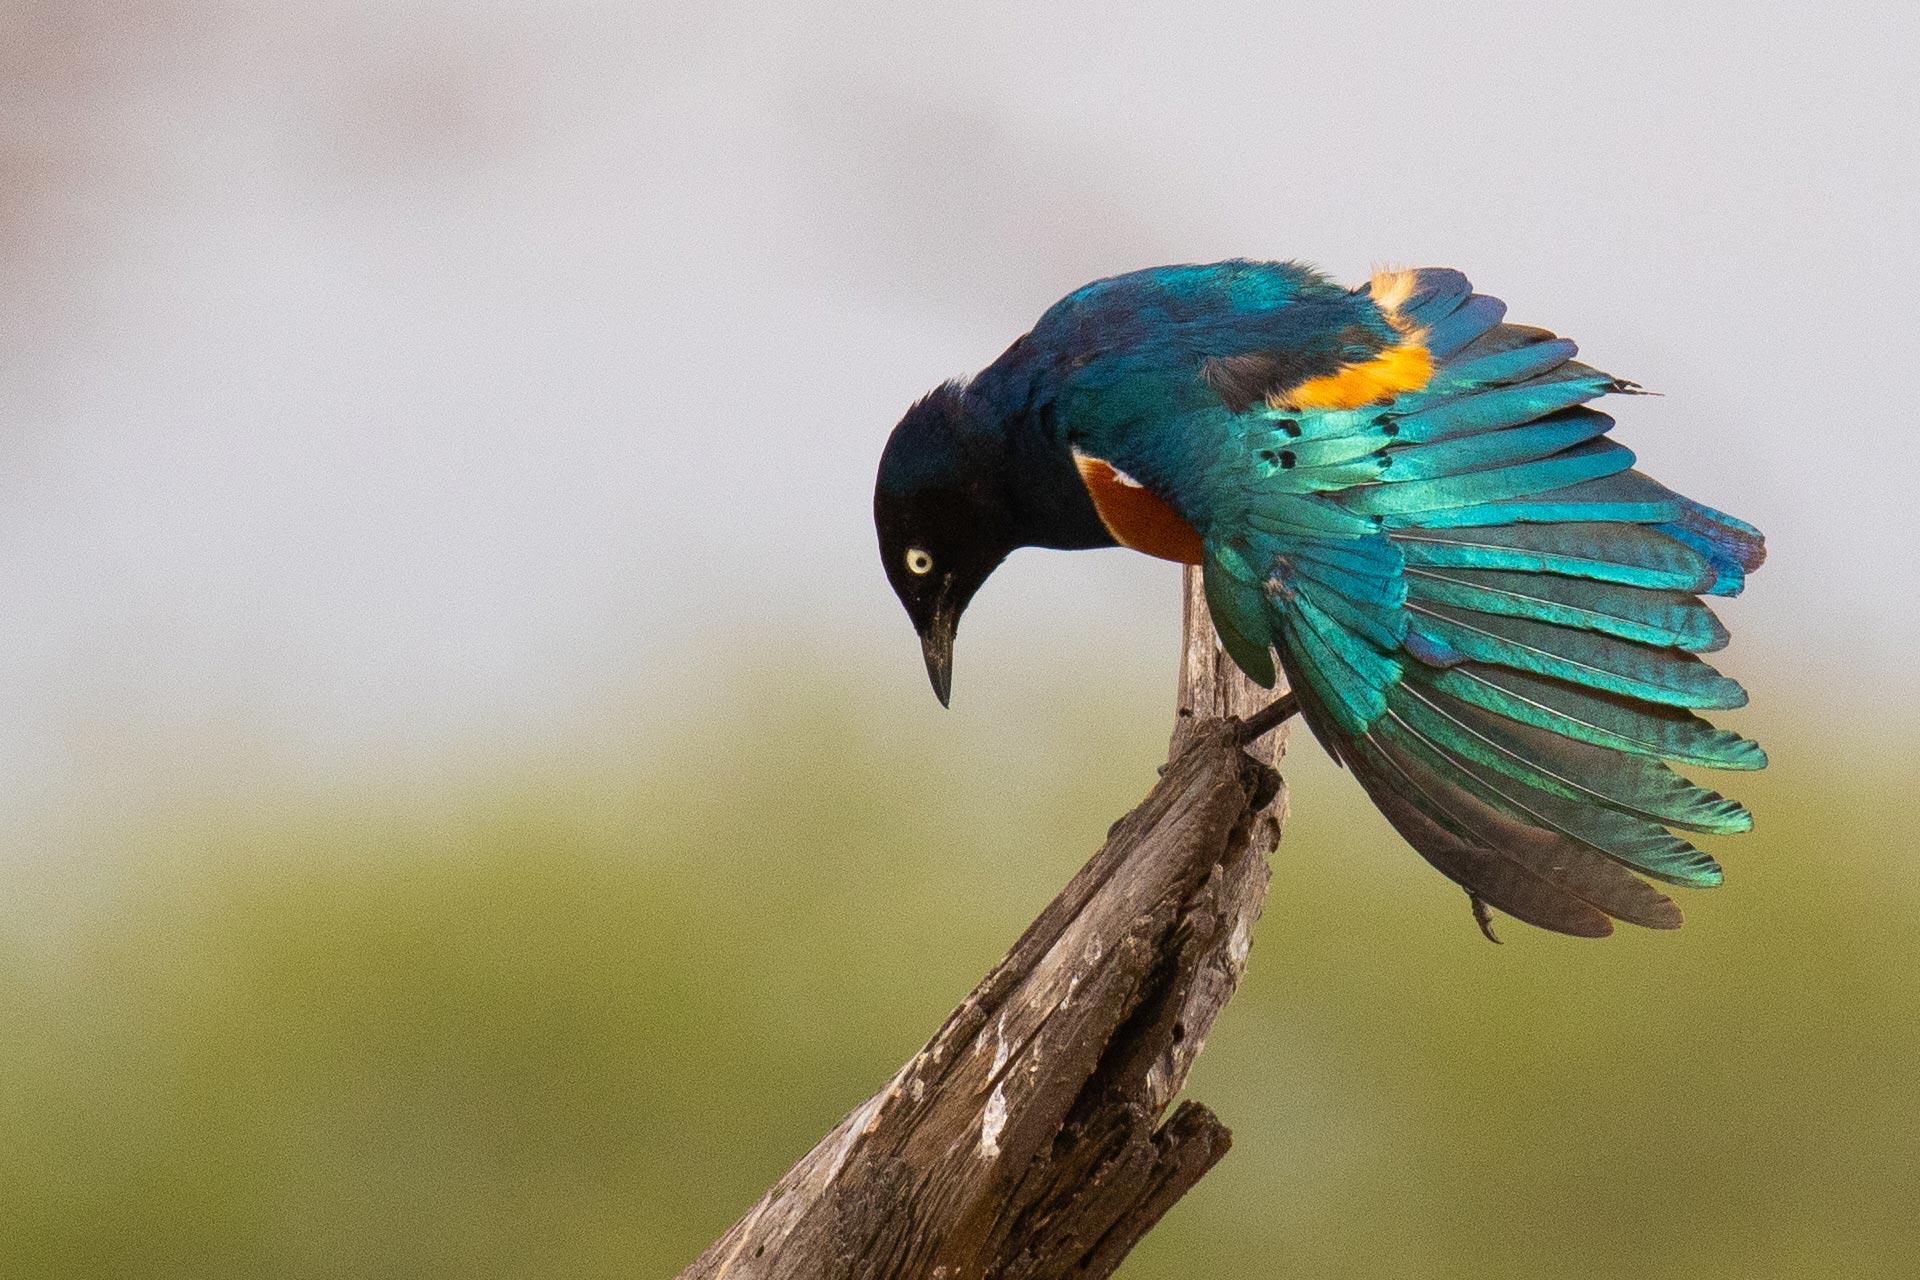 The greater blue-eared starling is a 22 cm long, short tailed bird. This starling is glossy blue-green with a purple-blue belly and blue ear patch. Its iris is bright yellow or orange. The sexes are similar, but the juvenile is duller and has blackish brown underparts